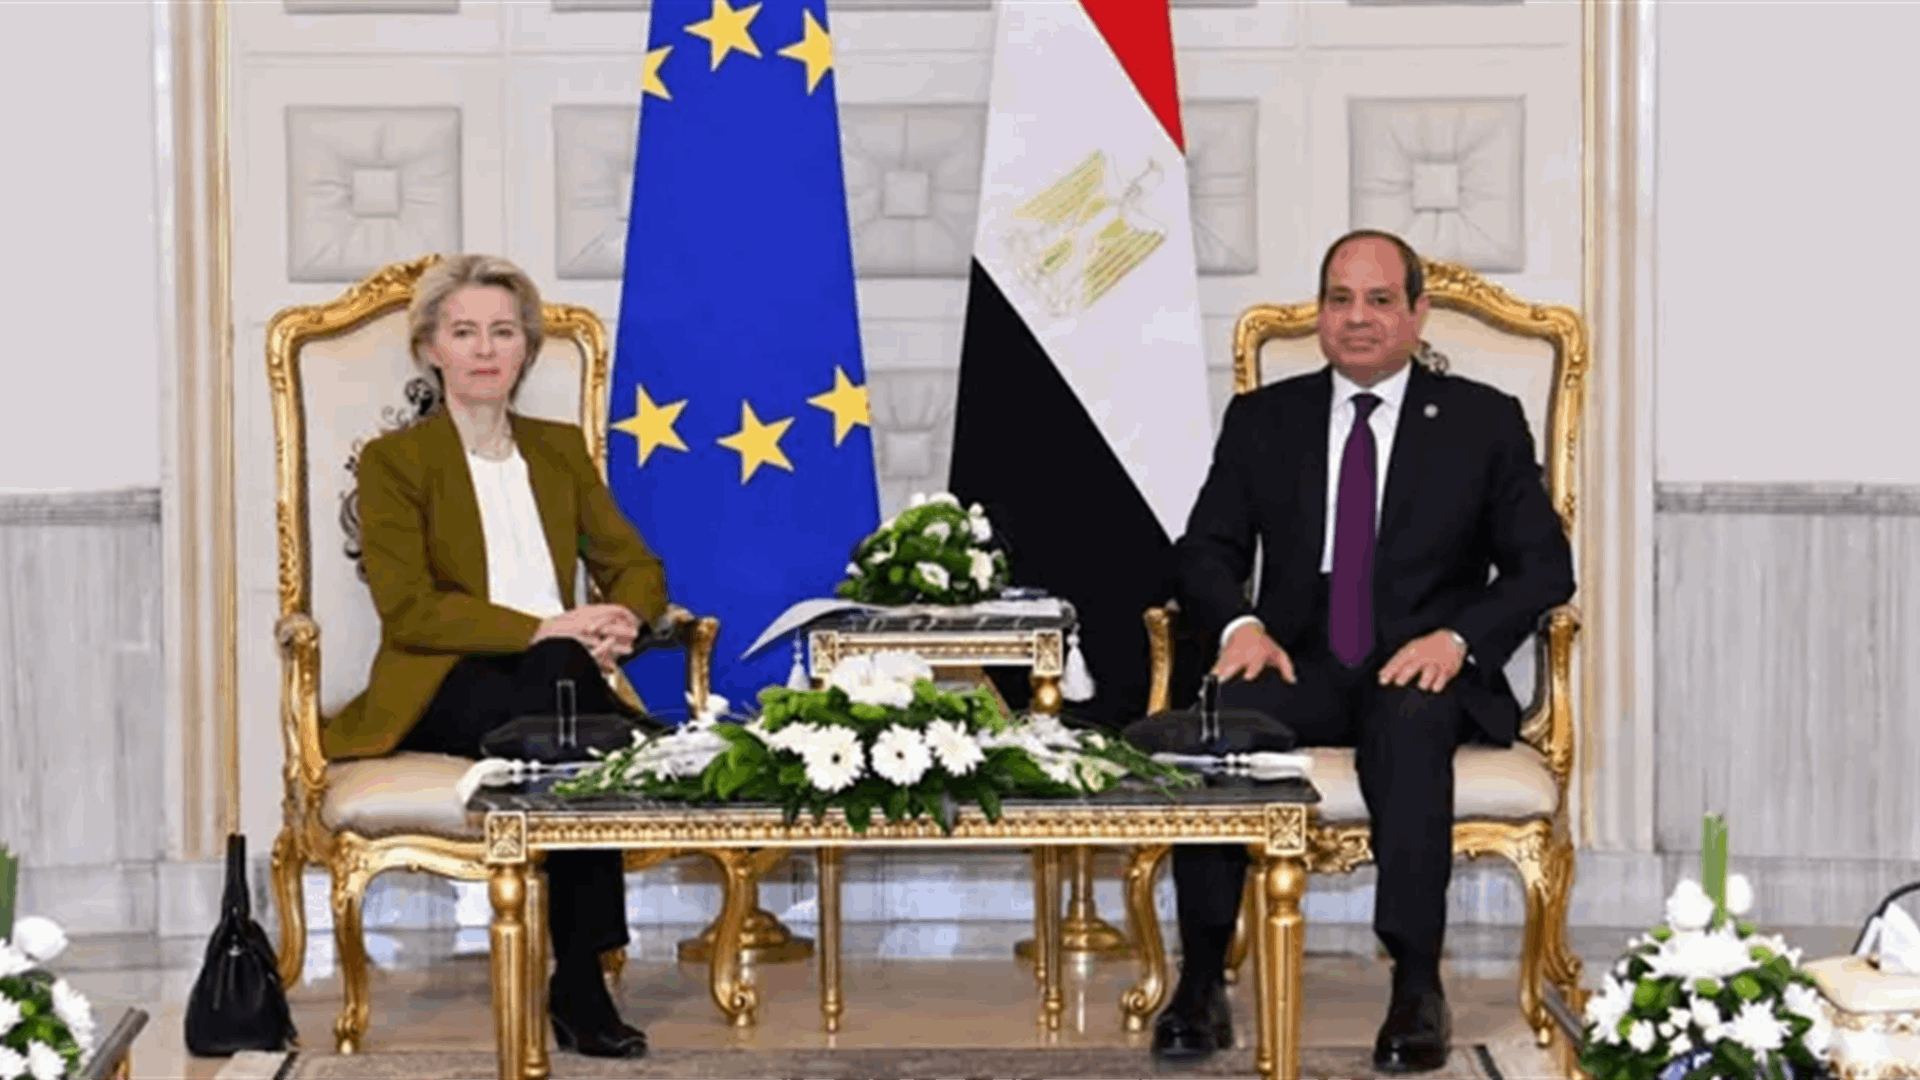 Sisi and von der Leyen: A two-state solution is the optimal path to ensuring lasting stability